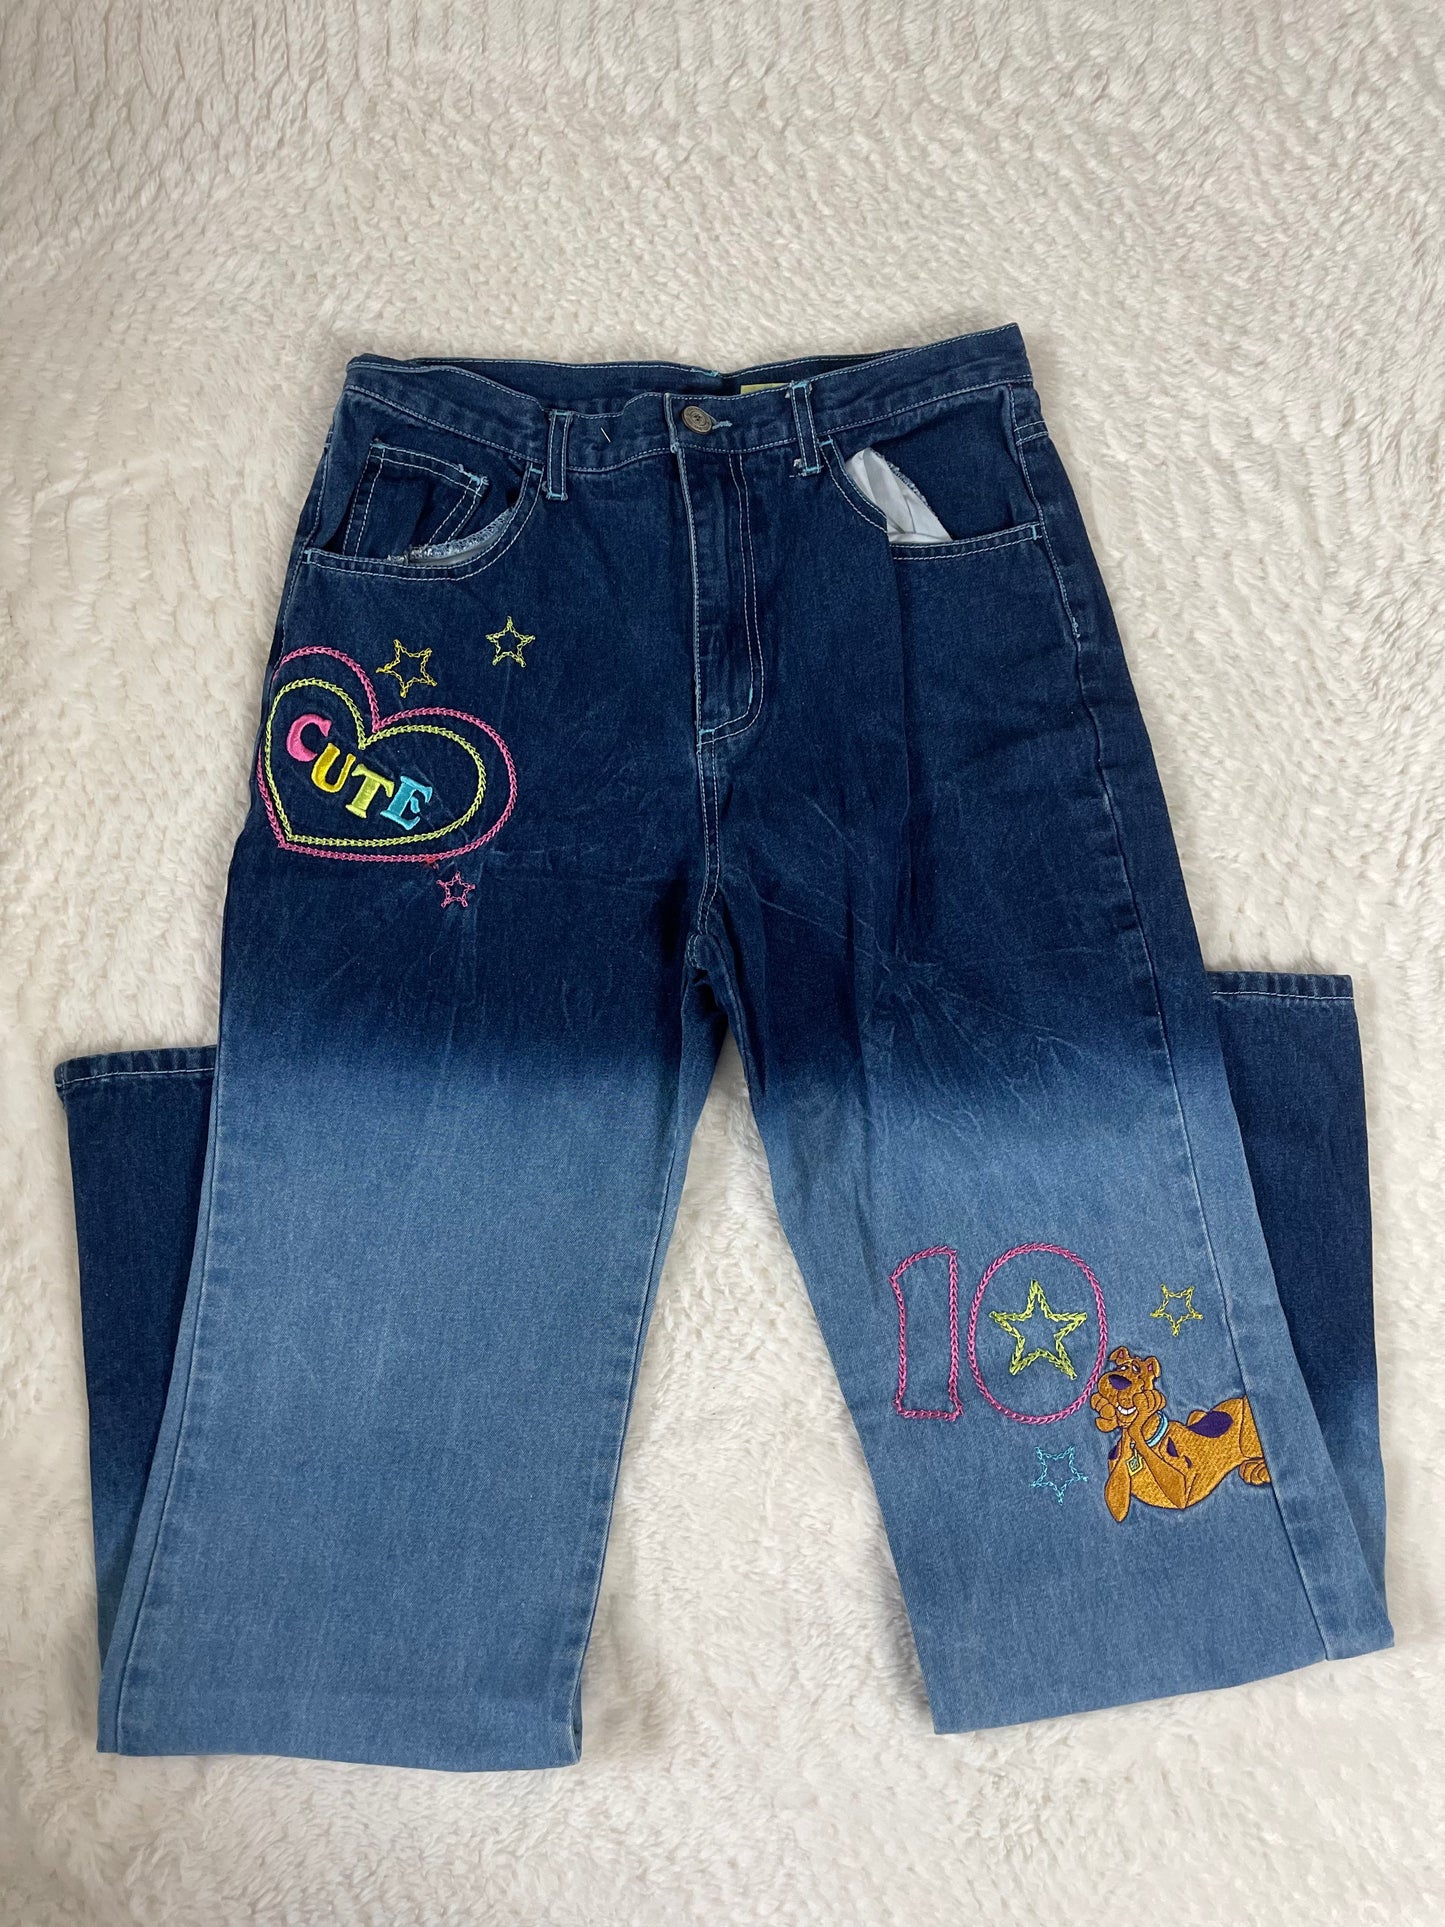 Y2K 2001 Scooby Doo Embroidered Jeans